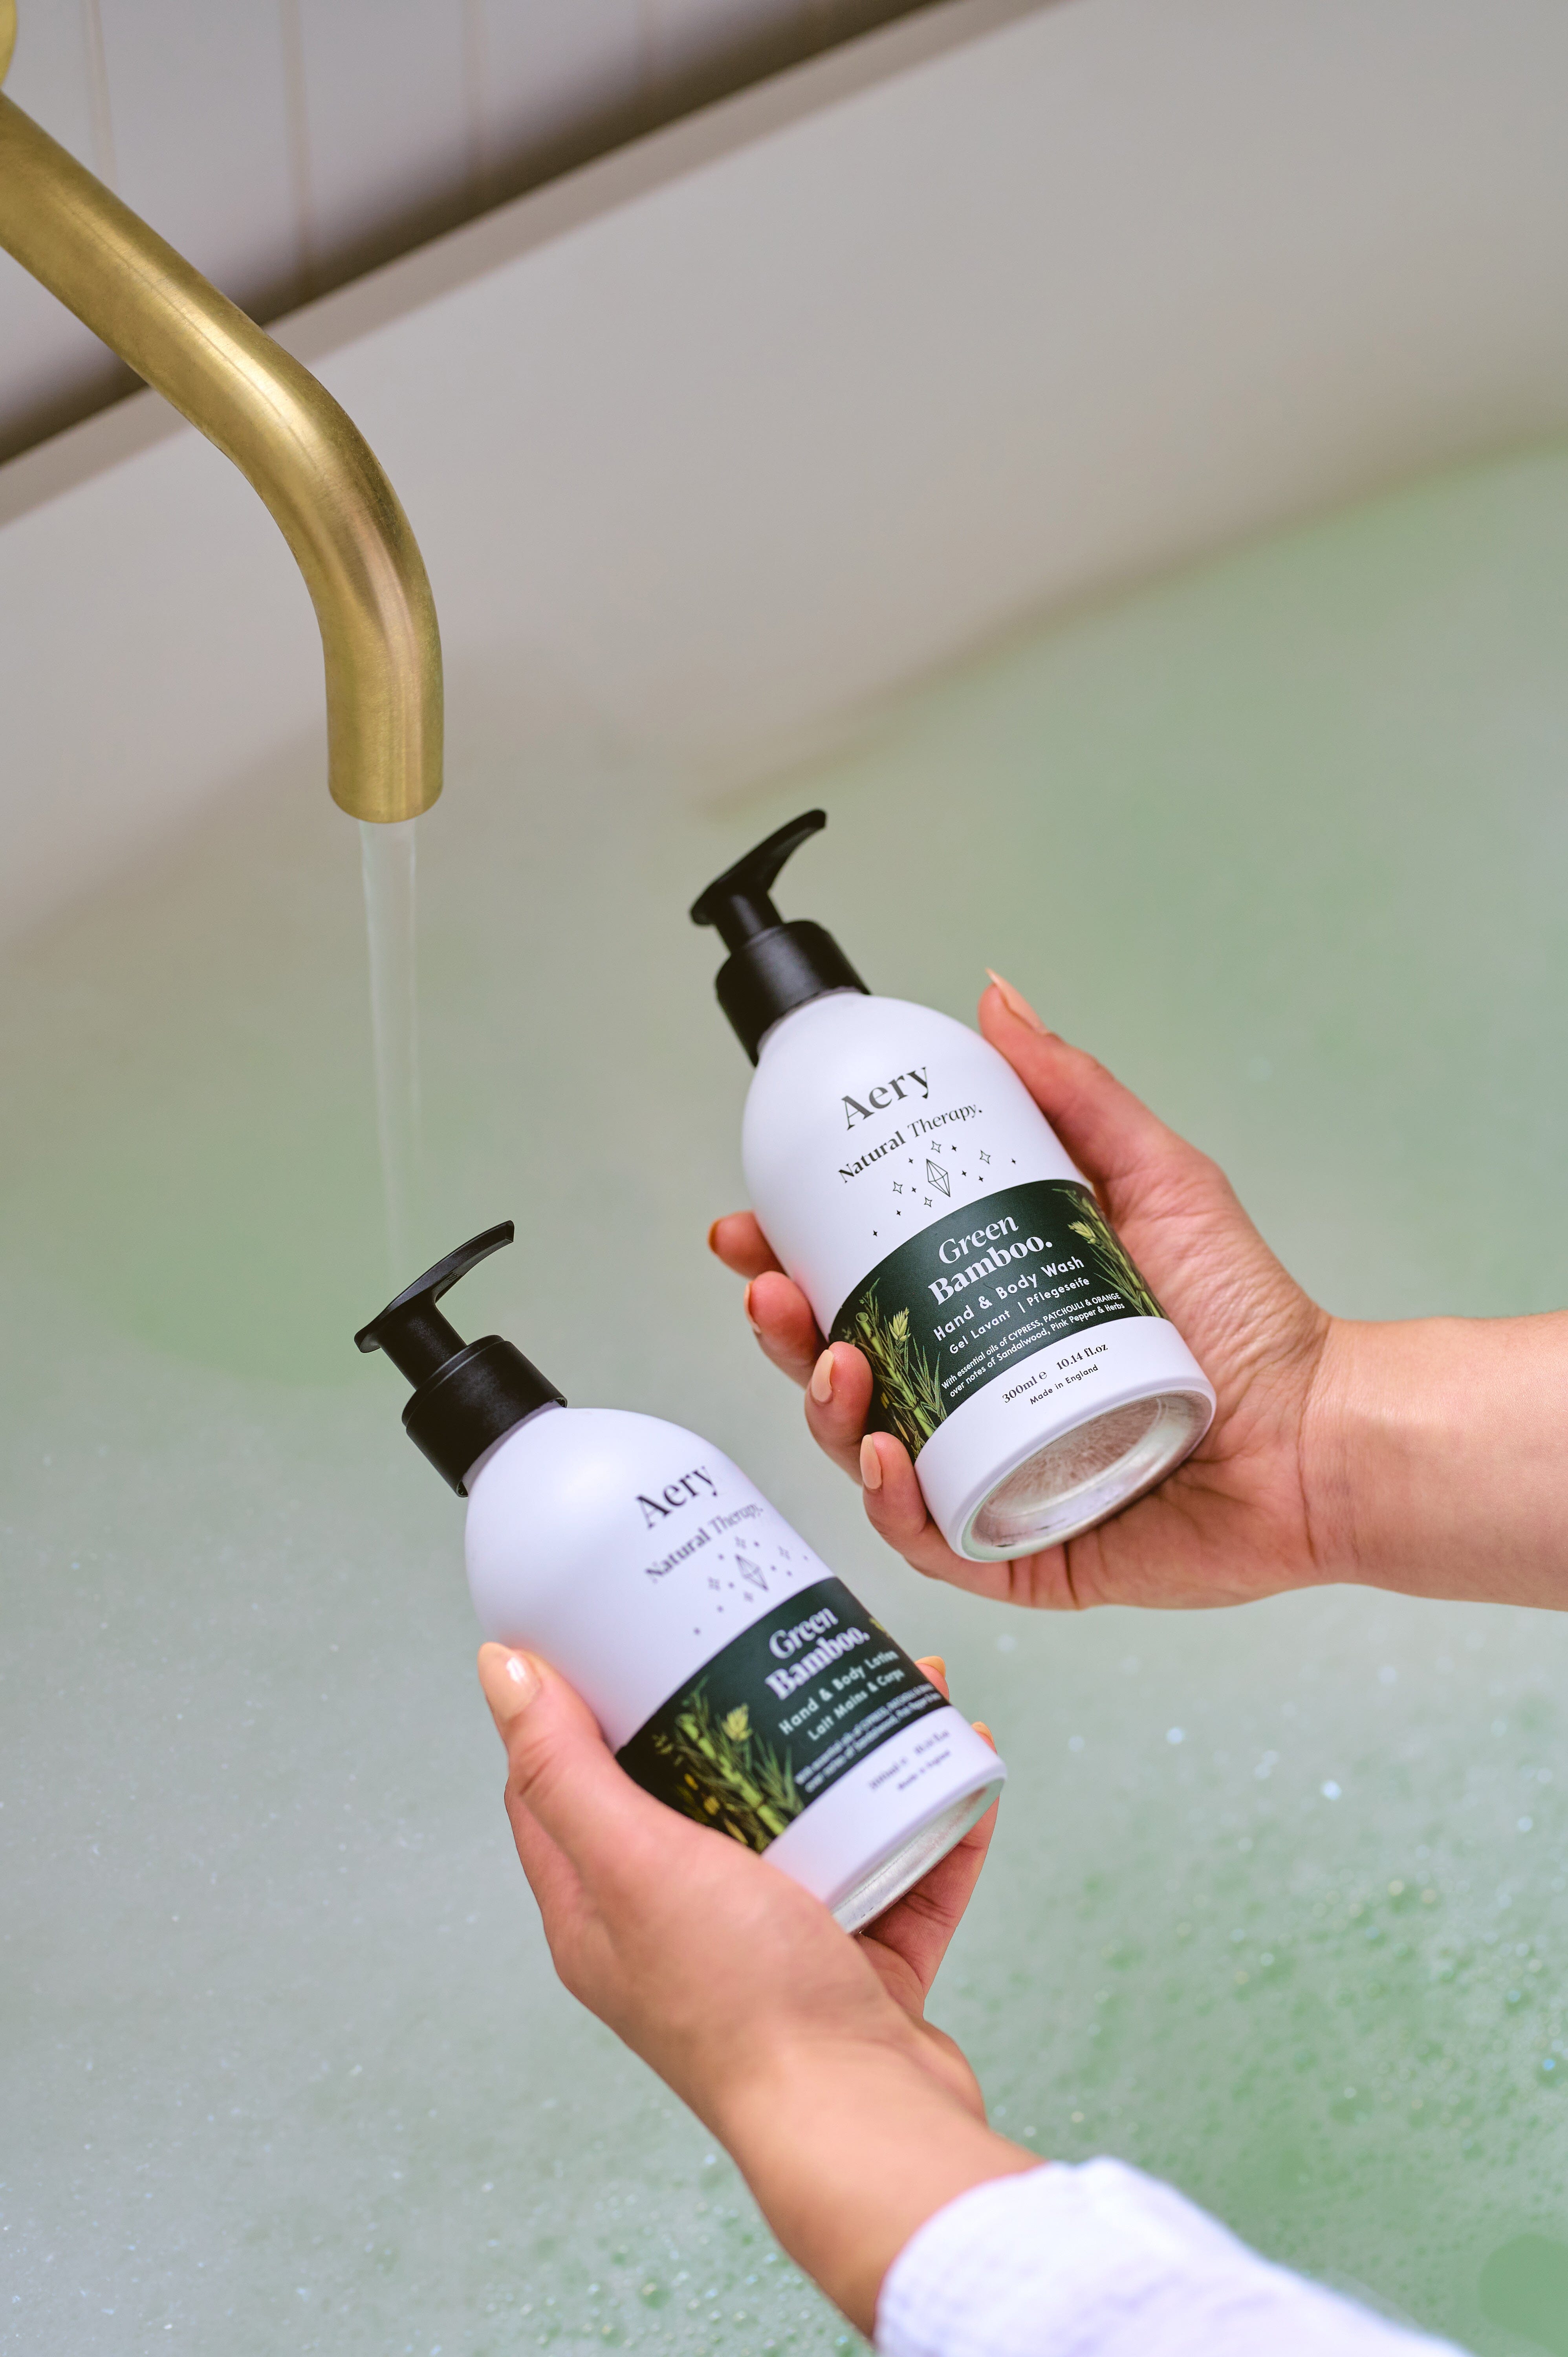 Green Bamboo hand and body wash and lotion duo displayed in hands in bubble bath